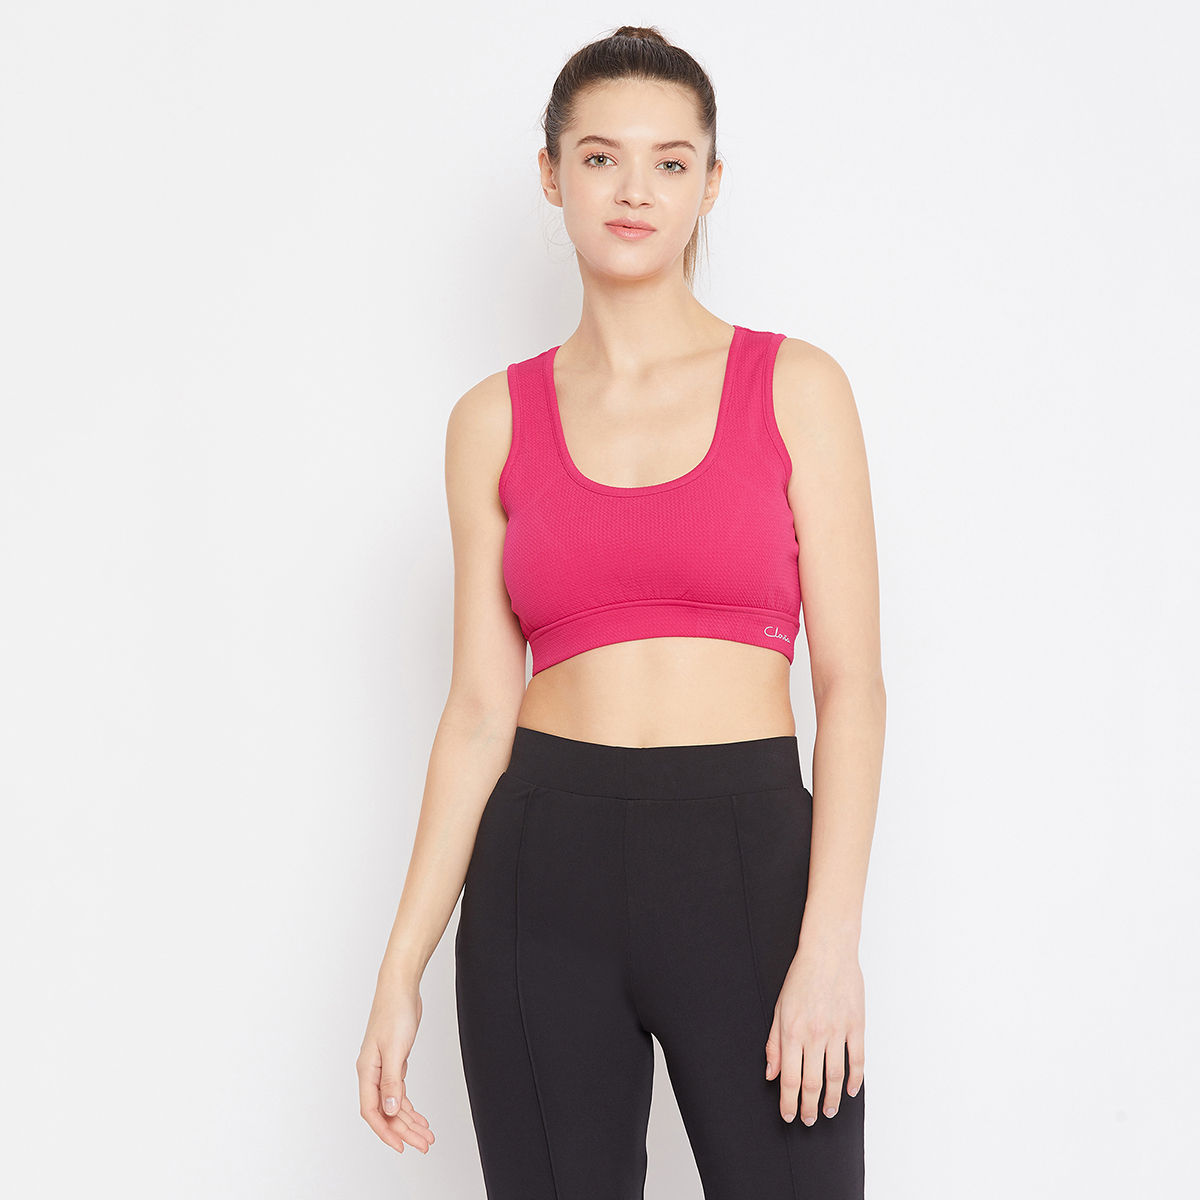 Buy Medium Impact Padded Sports Bra & Tights in Dusty Pink Online India,  Best Prices, COD - Clovia - AS0043P14